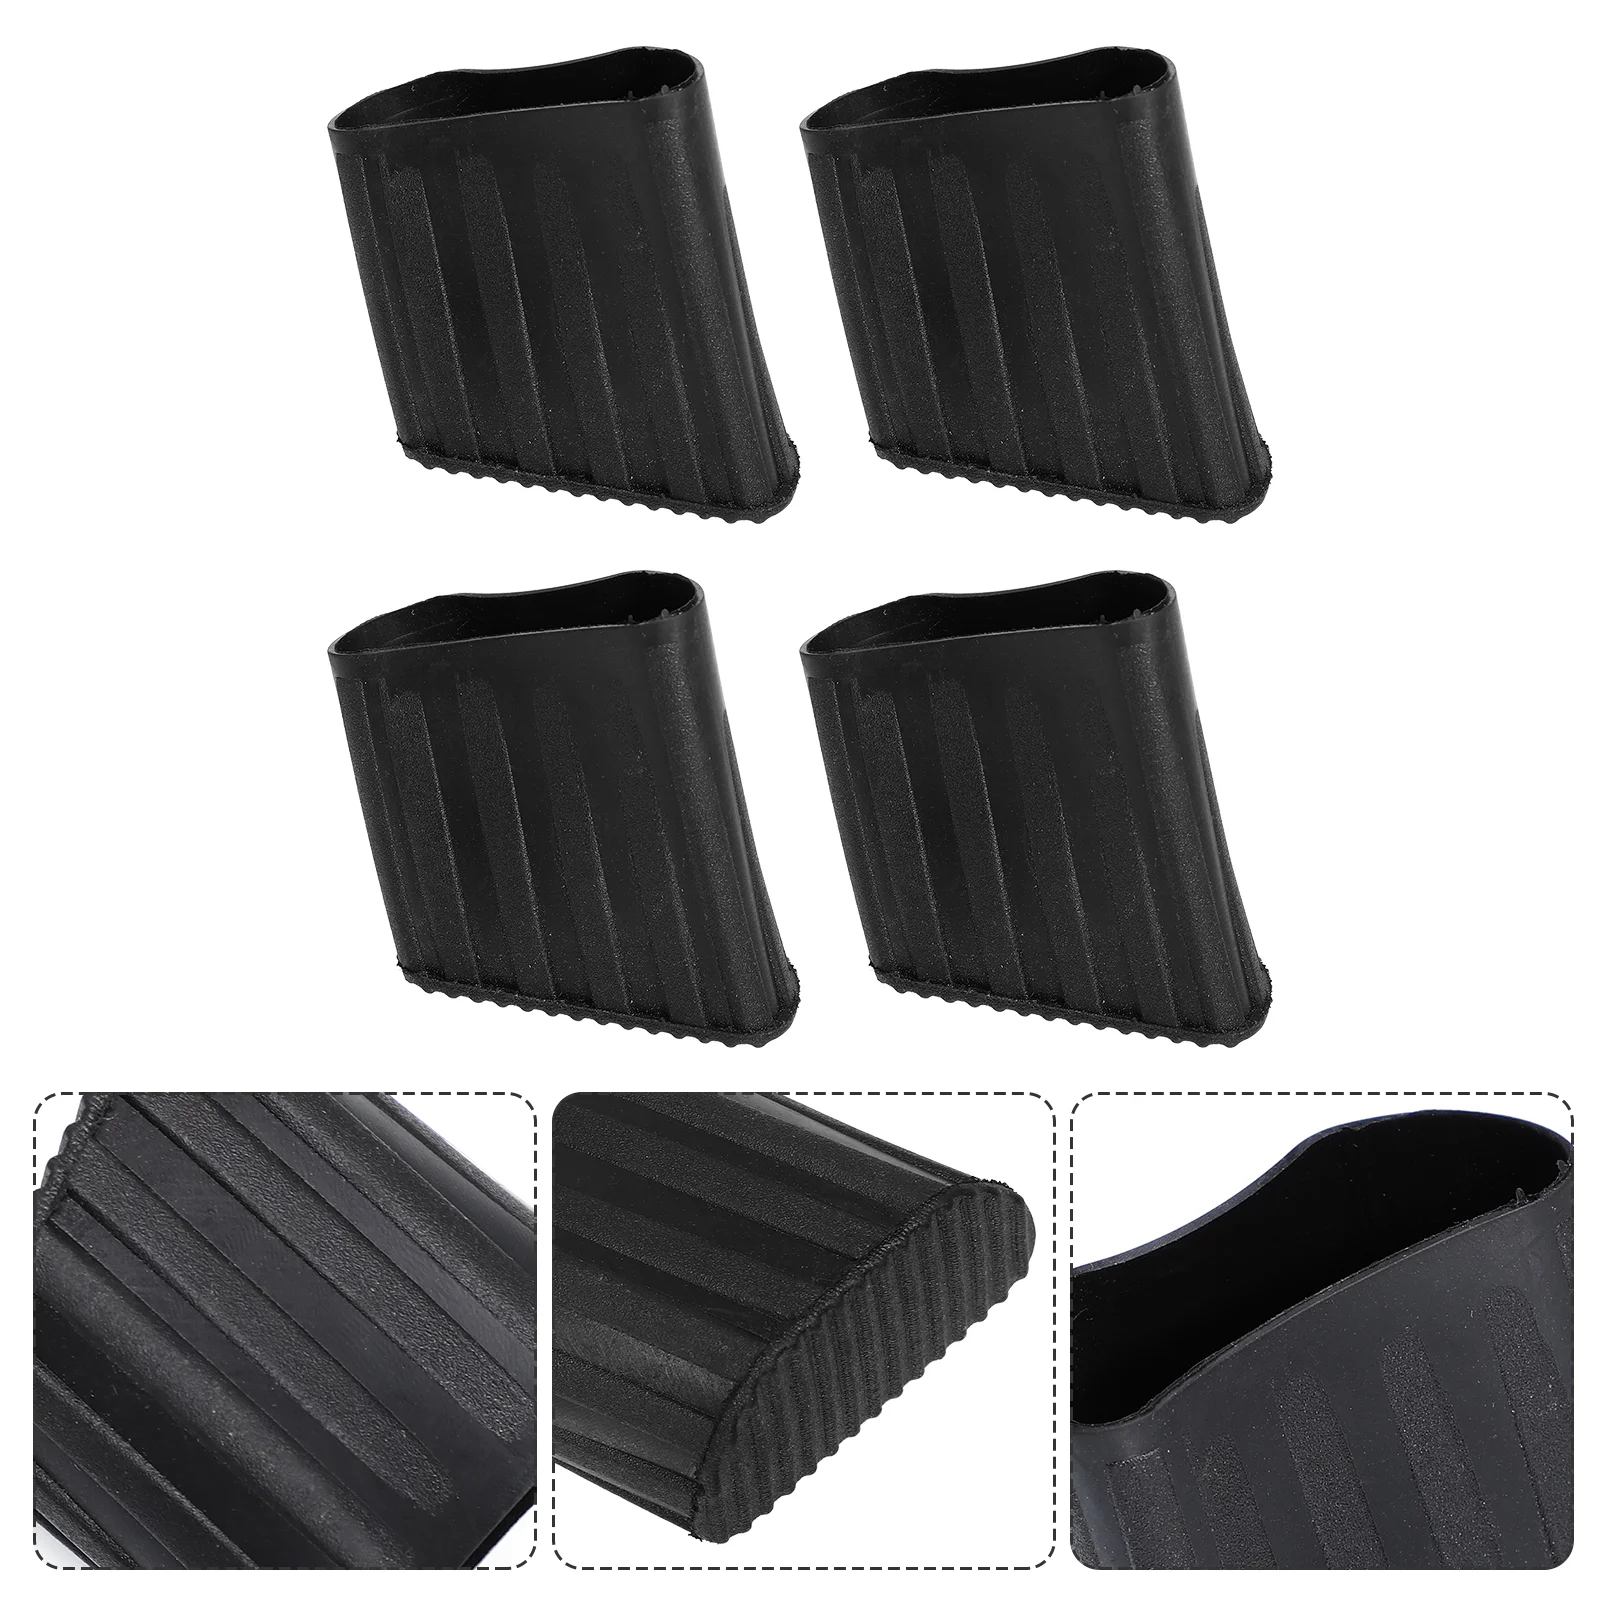 

Ladder Feet Covers Rubber Pads Black Ladder Covers Non Slip Ladder Boots Step Ladder Feet Replacements Accessories